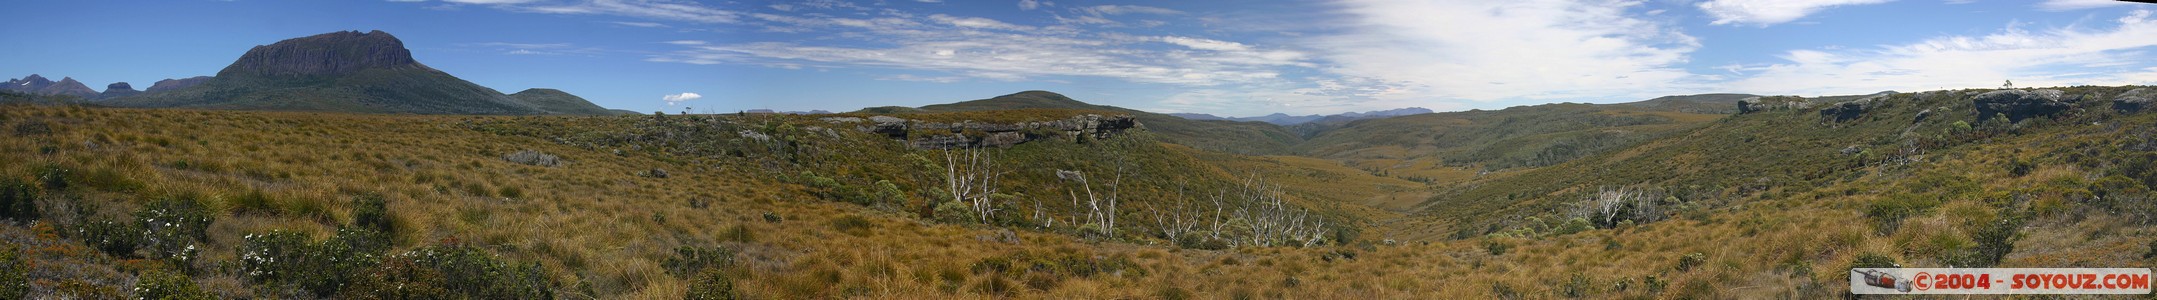 Overland Track - vue panoramique
Mots-clés: panorama